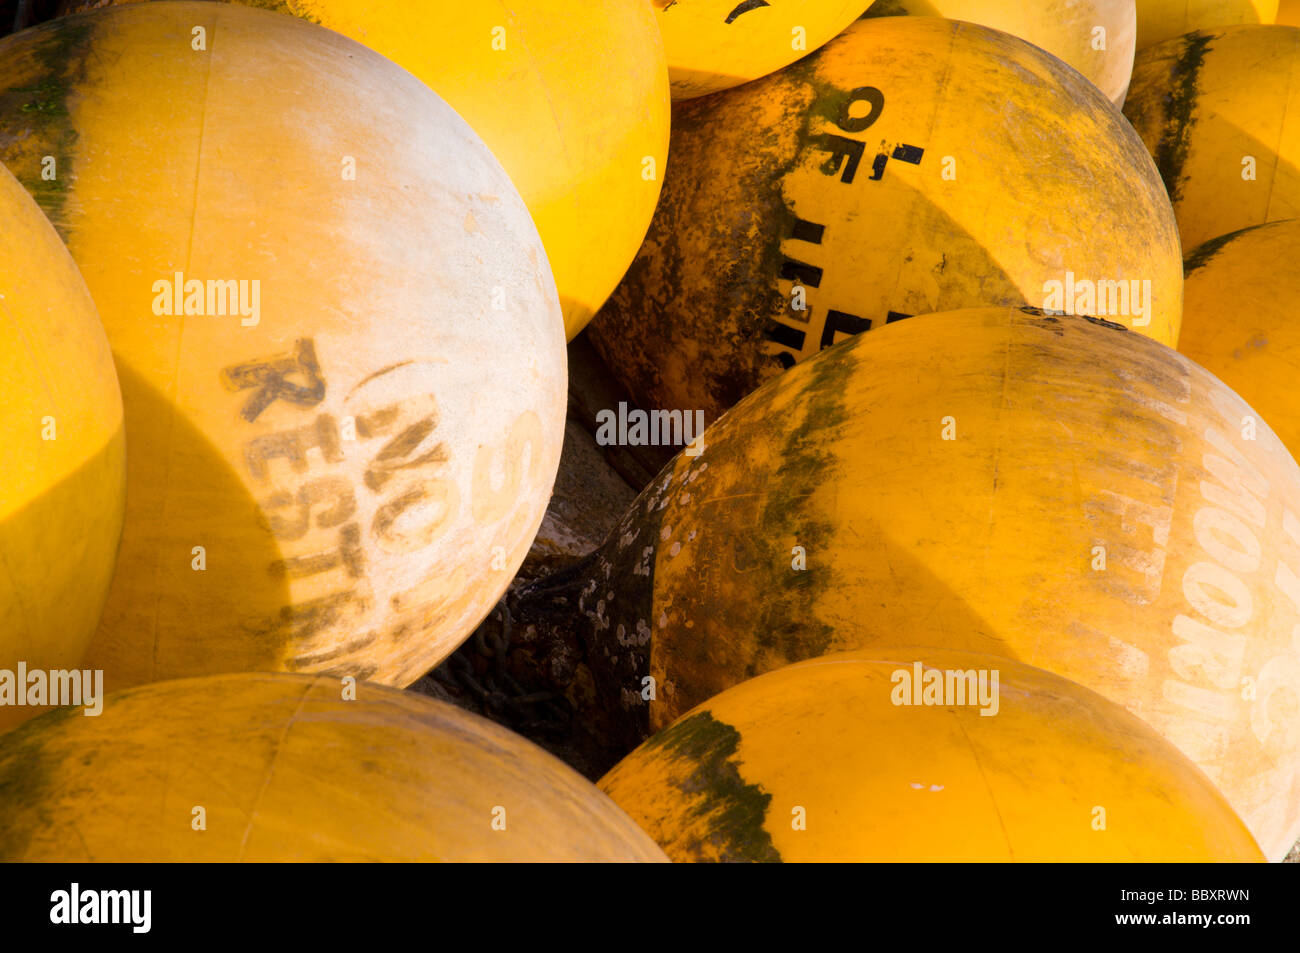 Big yellow buoys clustered together ready to be put out to sea Stock Photo